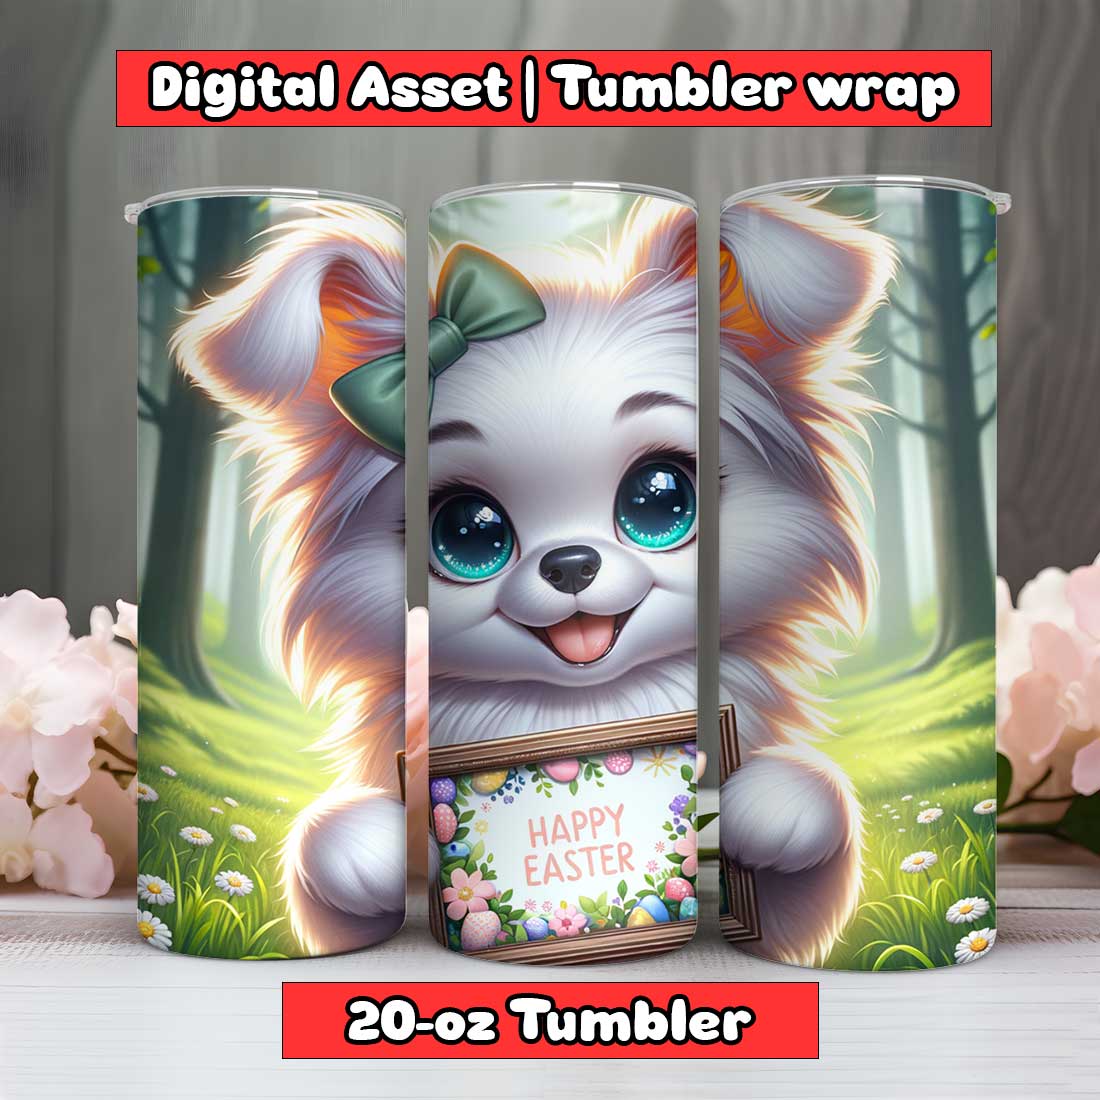 Dog Happy Easter Tumbler Wrap | 20-oz | PNG cover image.